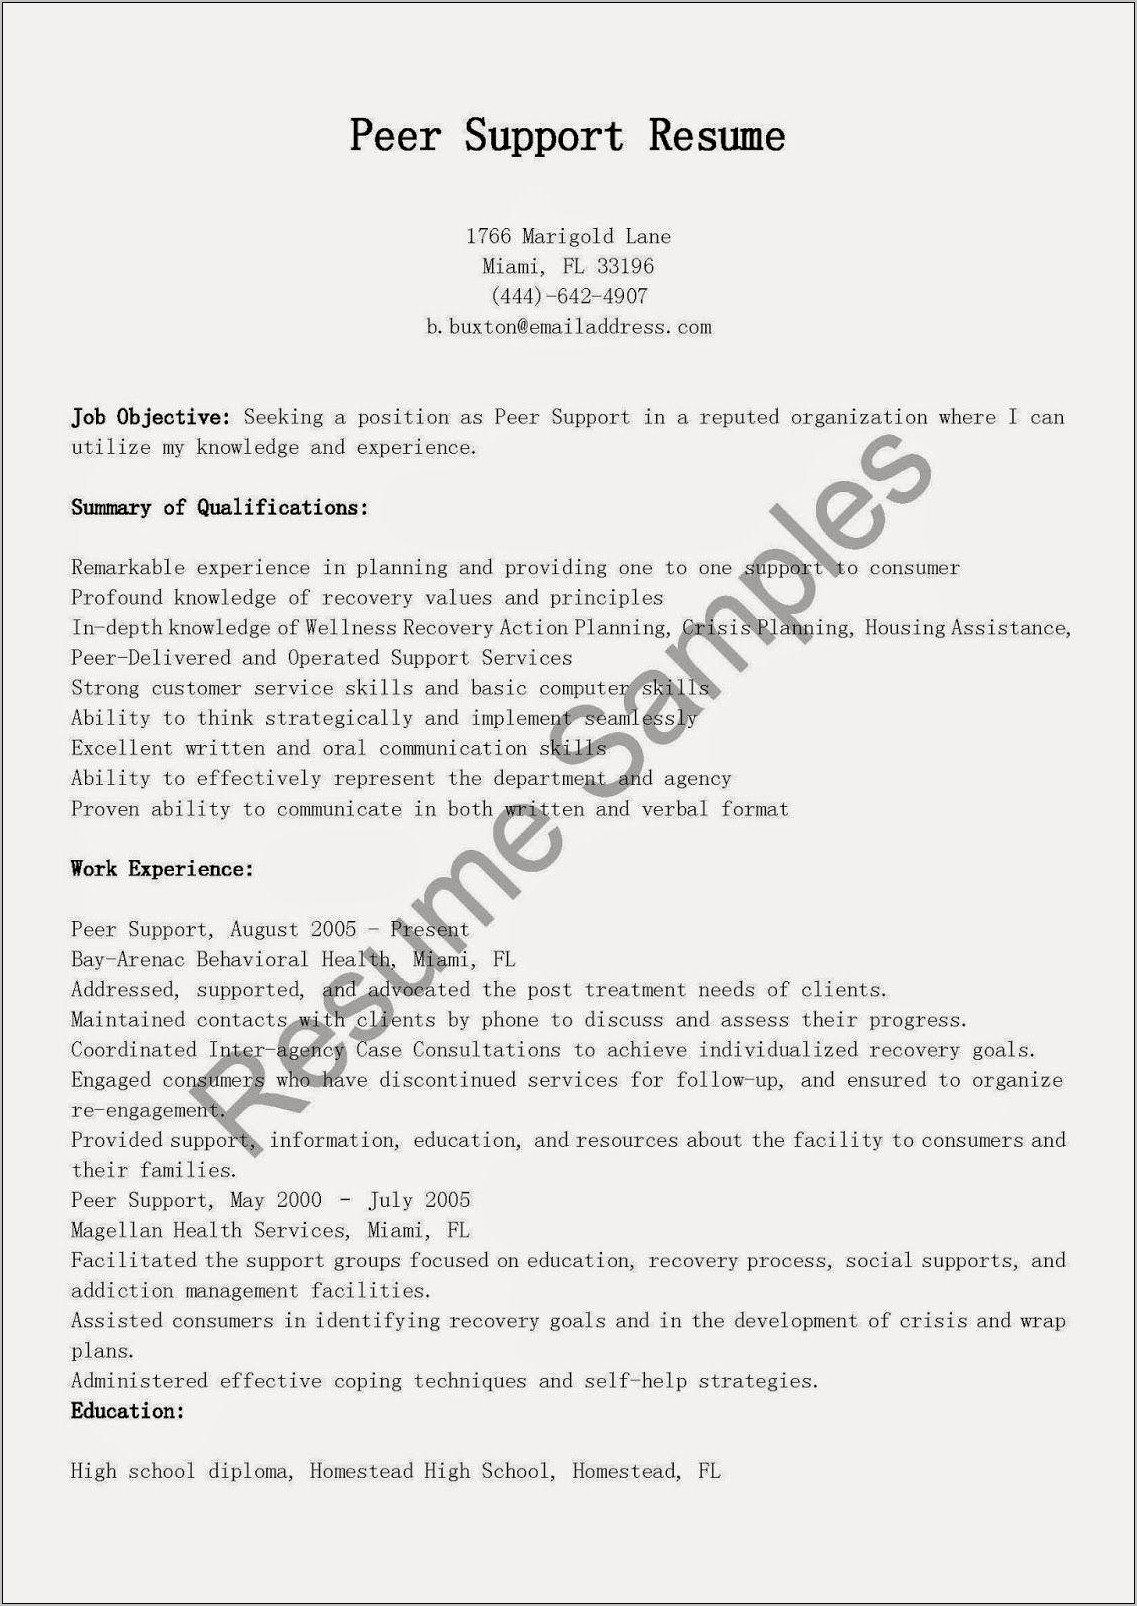 Peer Support Specialist Resume Examples